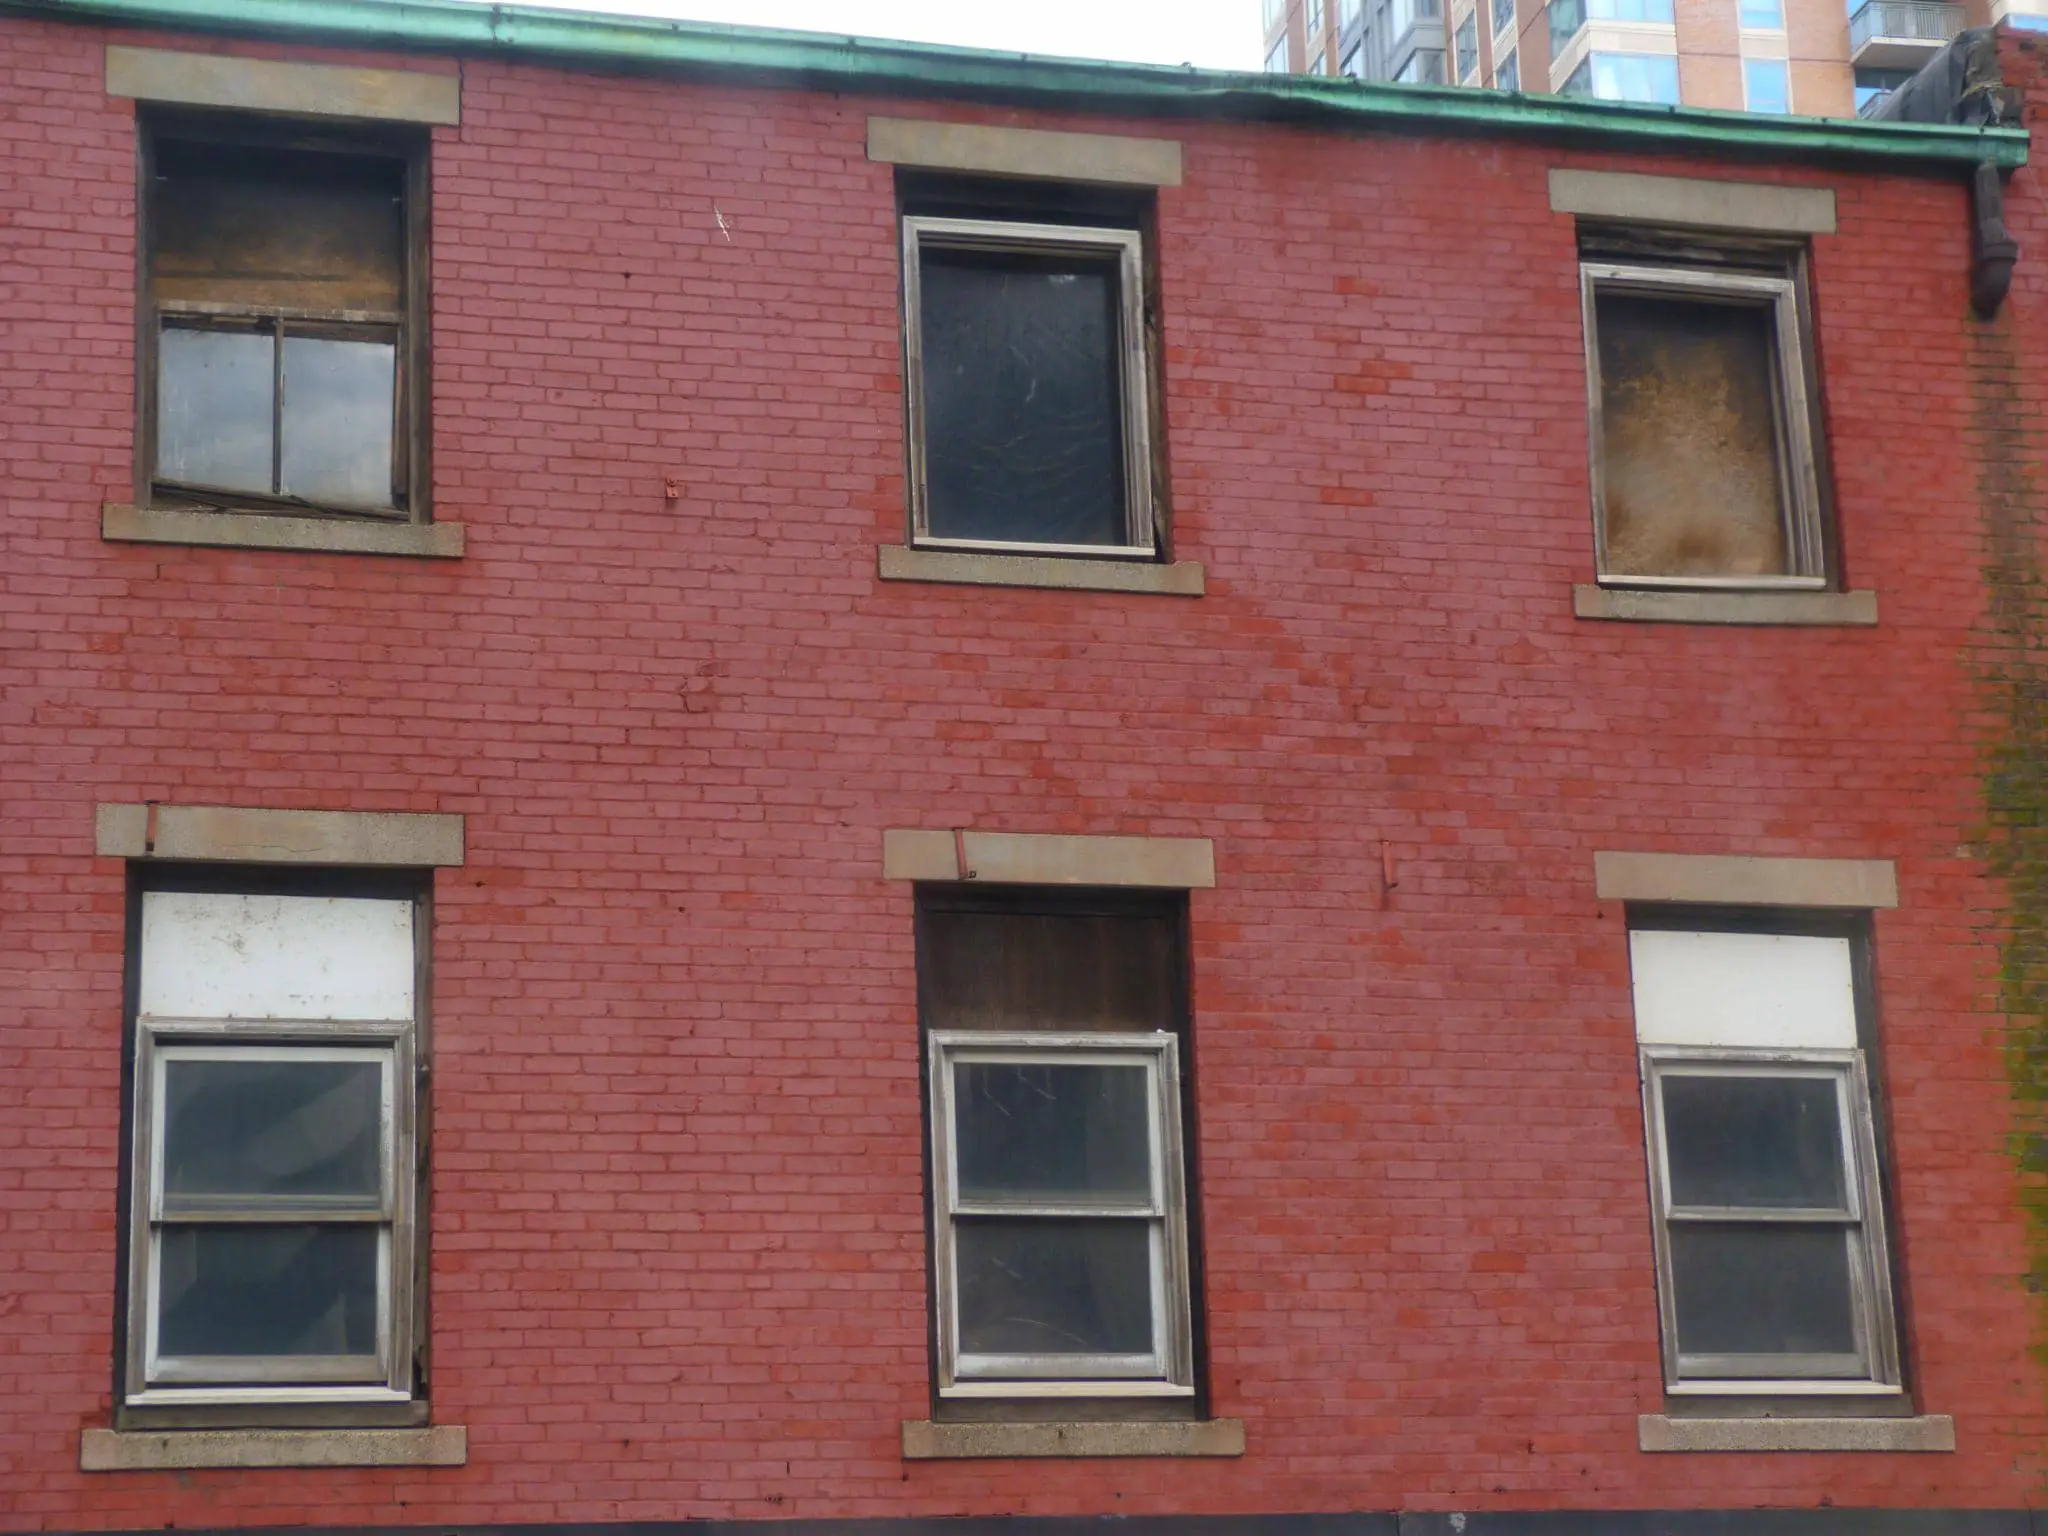 Building with boarded up windows